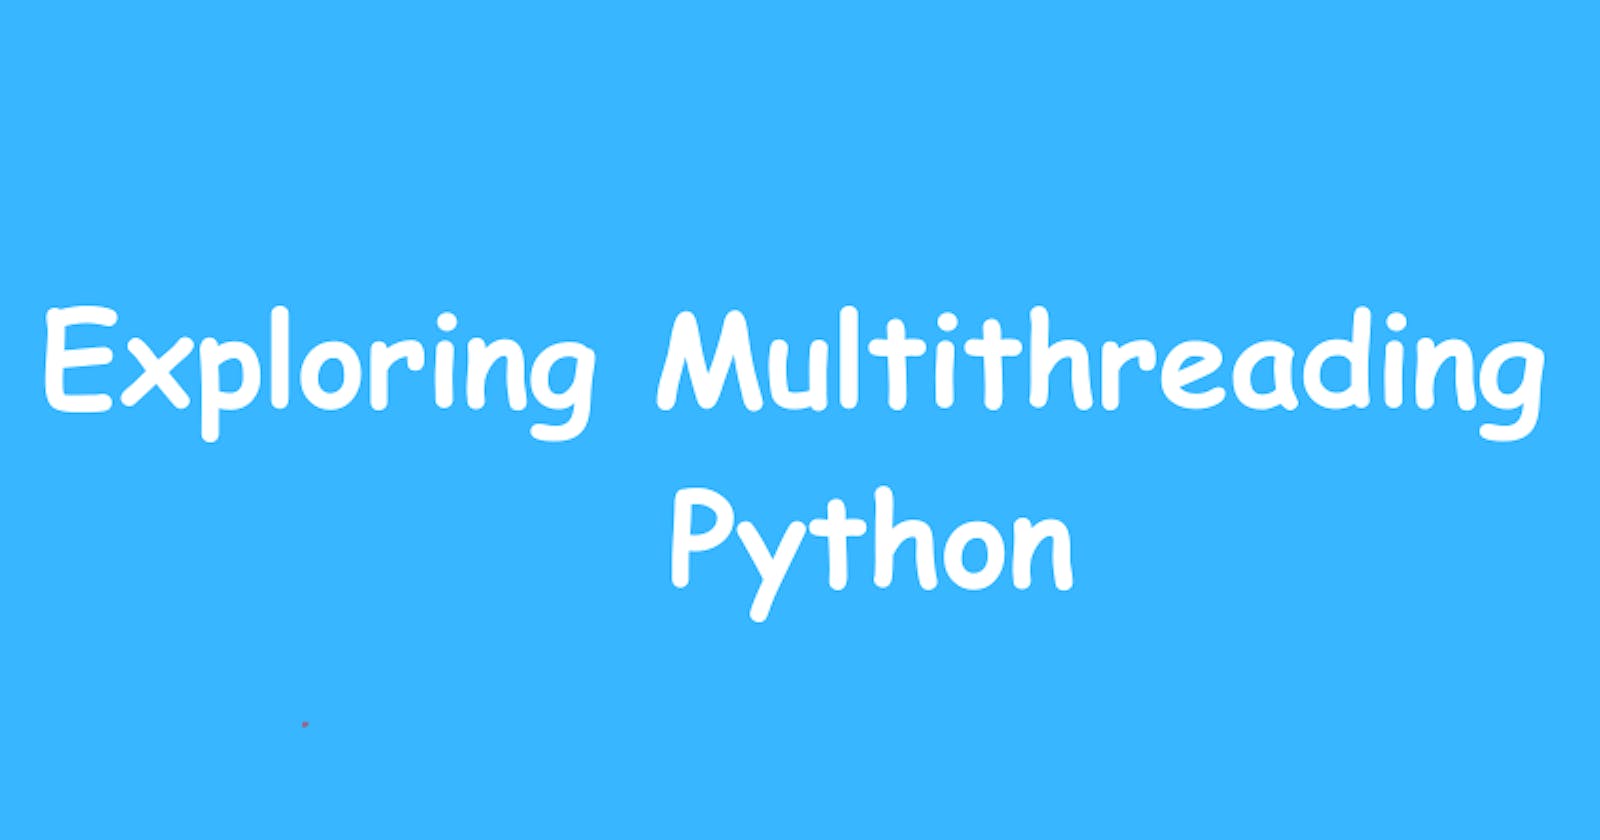 How to build Asynchronous applications in Python: Exploring Multithreading